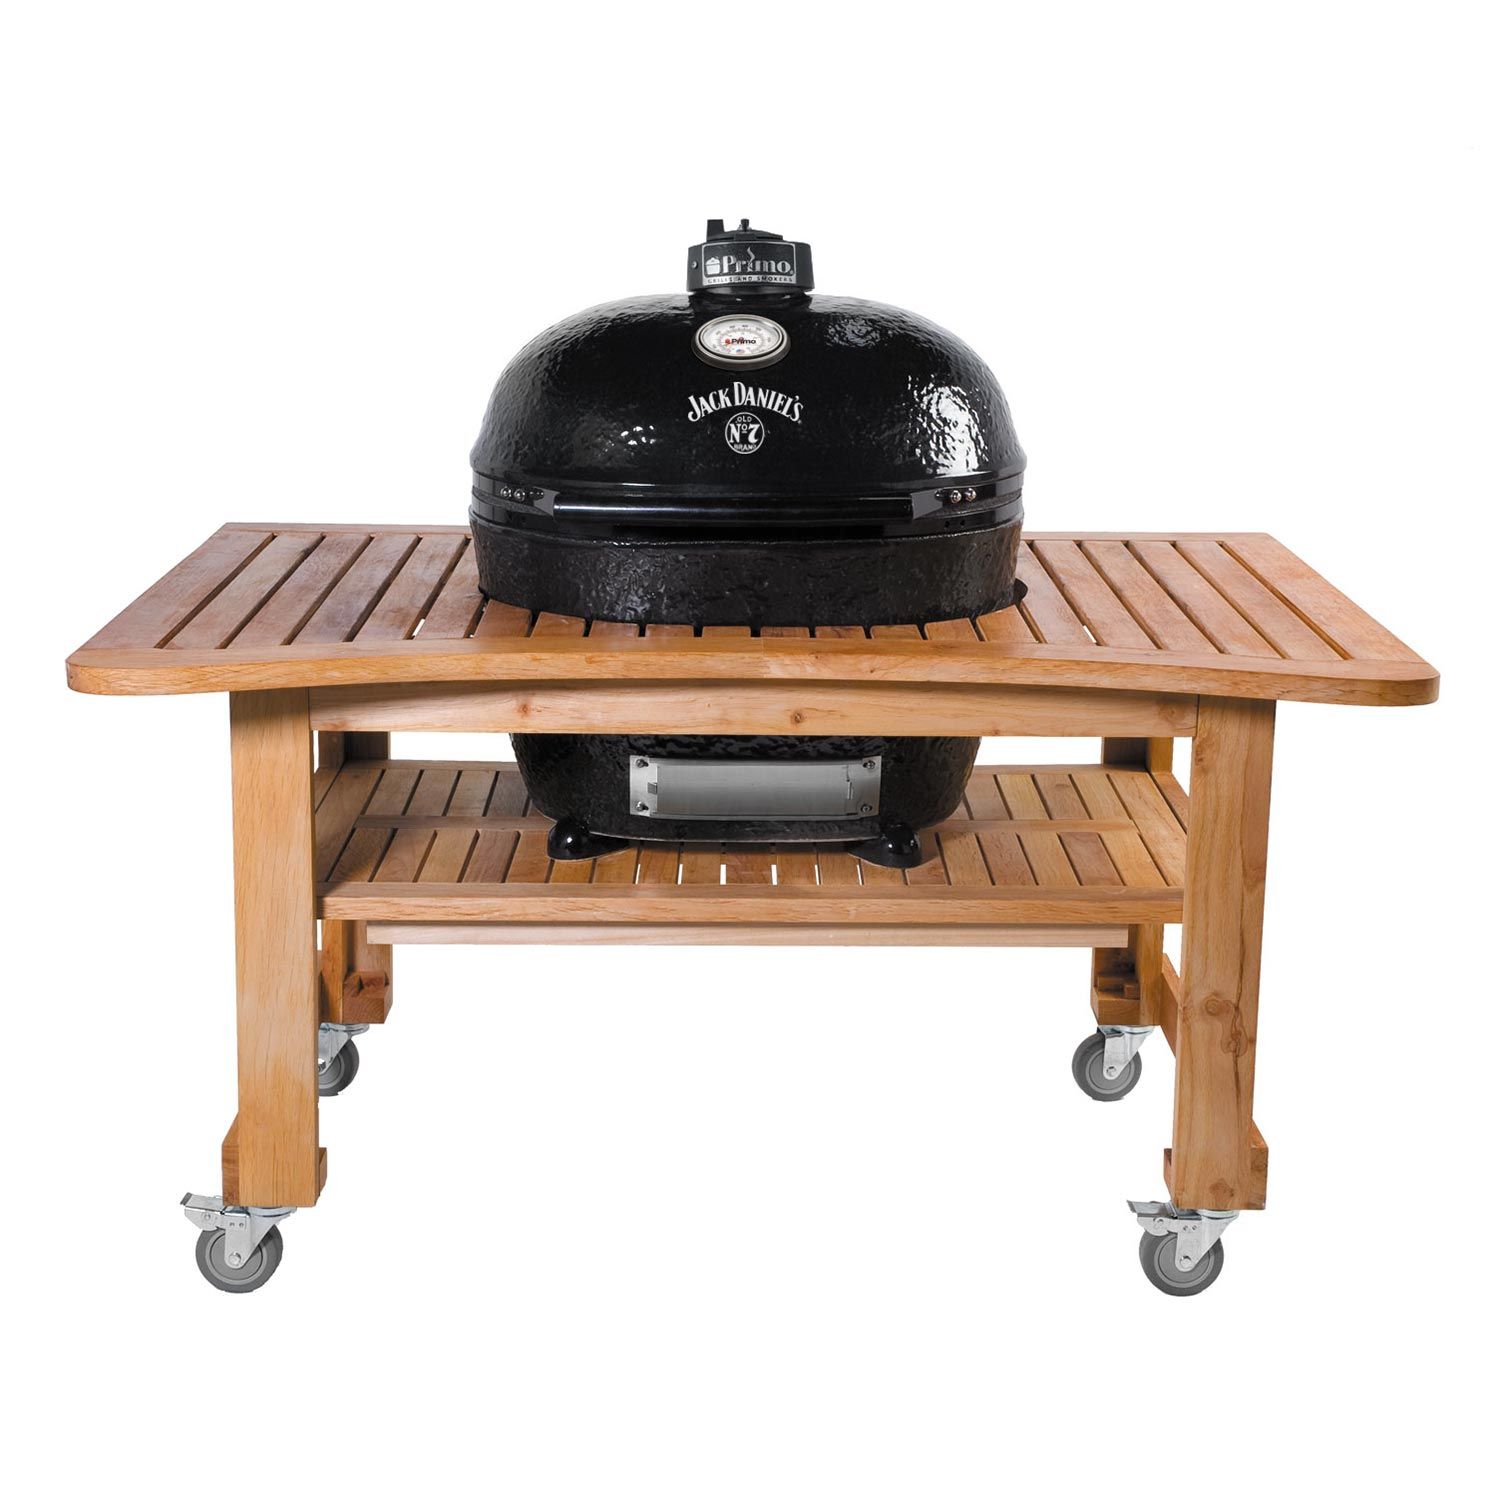 lovgivning rørledning kaos Primo CXLHJ-600 Jack Daniel's Edition Extra Large Oval Ceramic Charcoal Kamado  Grill on Curved Cypress Table